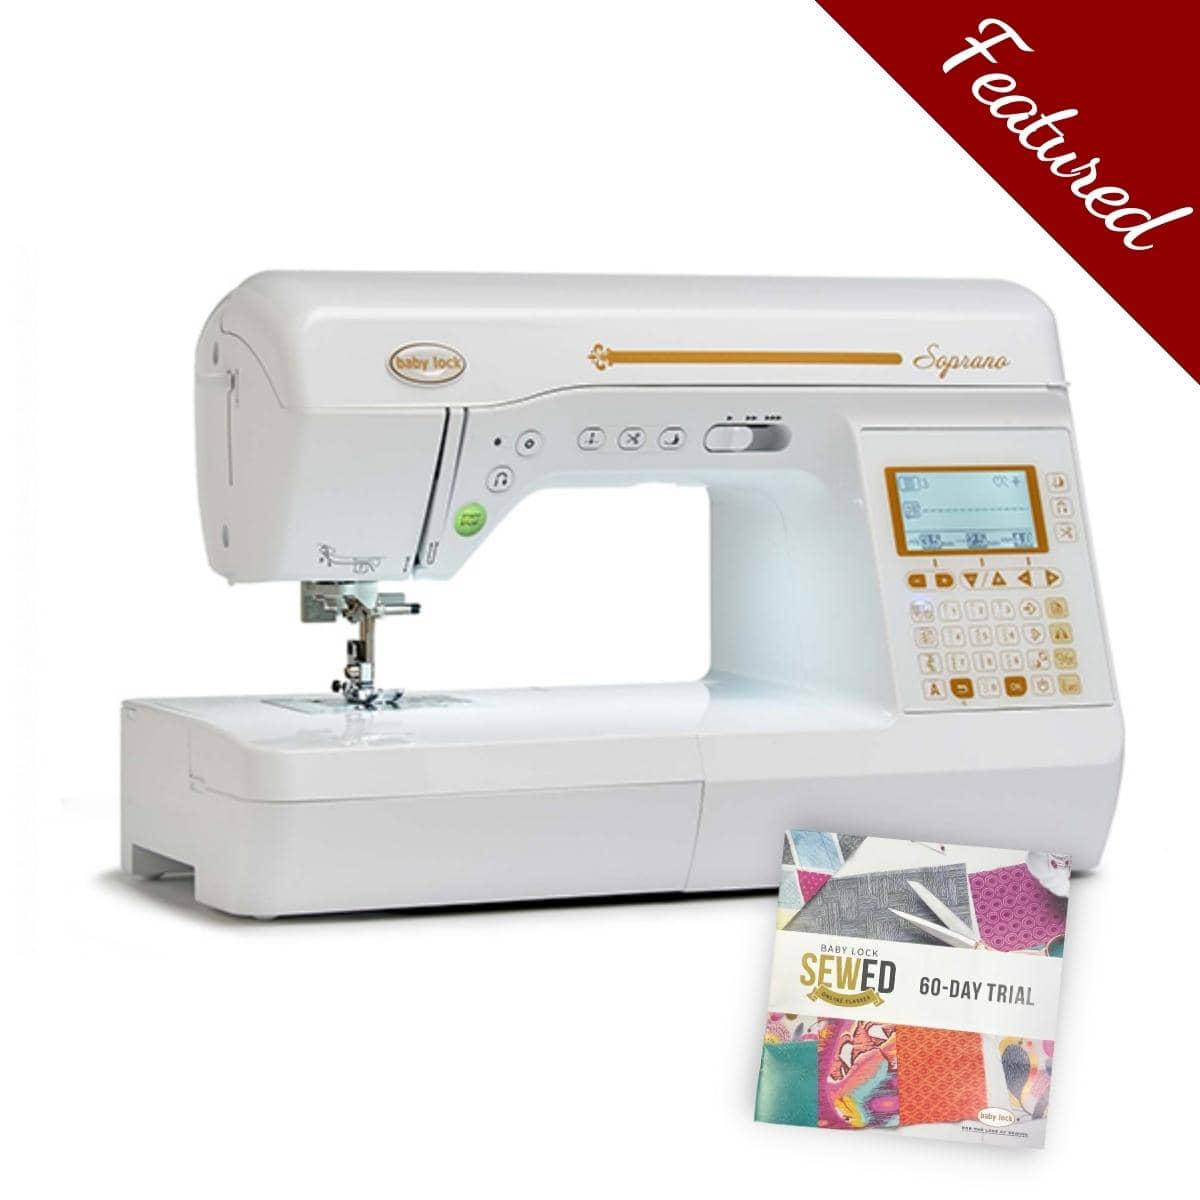 Sewing machines: Where to buy Janome, Juki, Baby Lock, and more